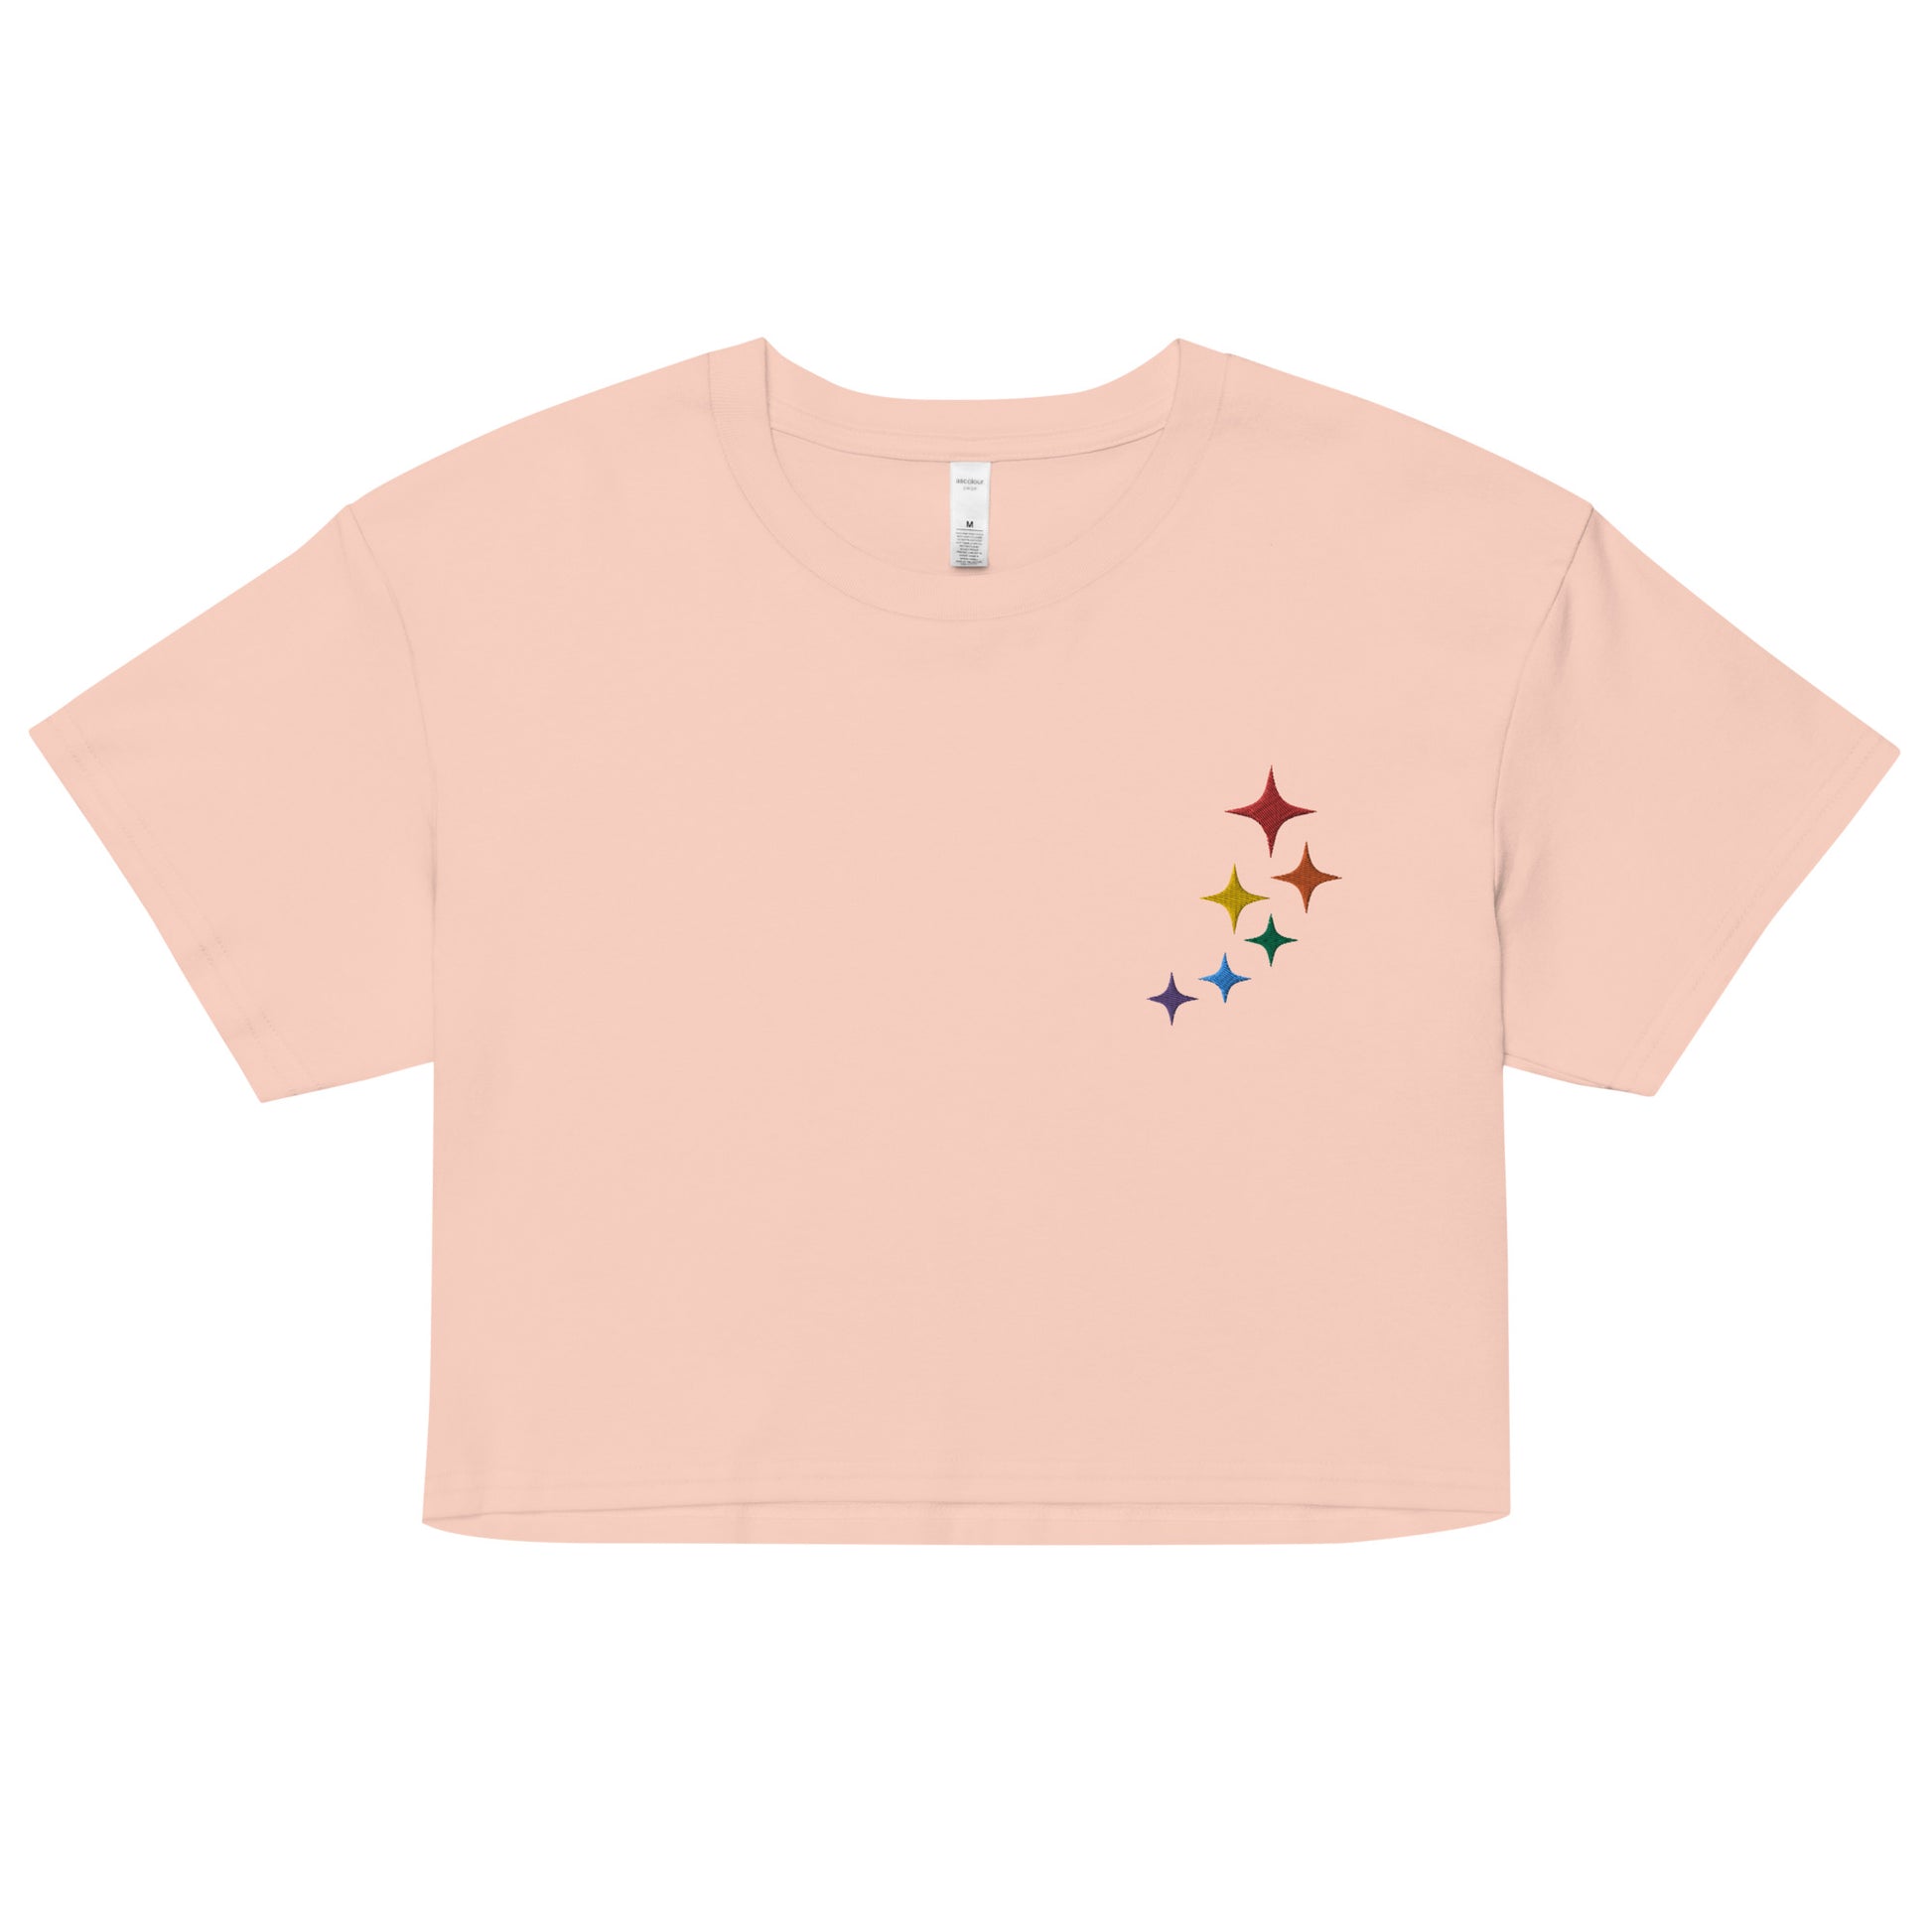 A relaxed, modest pale pink crop top features a subtle rainbow stars embroidery. Adding a touch of rainbow to your look—a playful celebration of lgbtq culture! Made from 100% combed cotton. Available in Extra Small, Small, Medium, Large, Extra Large.